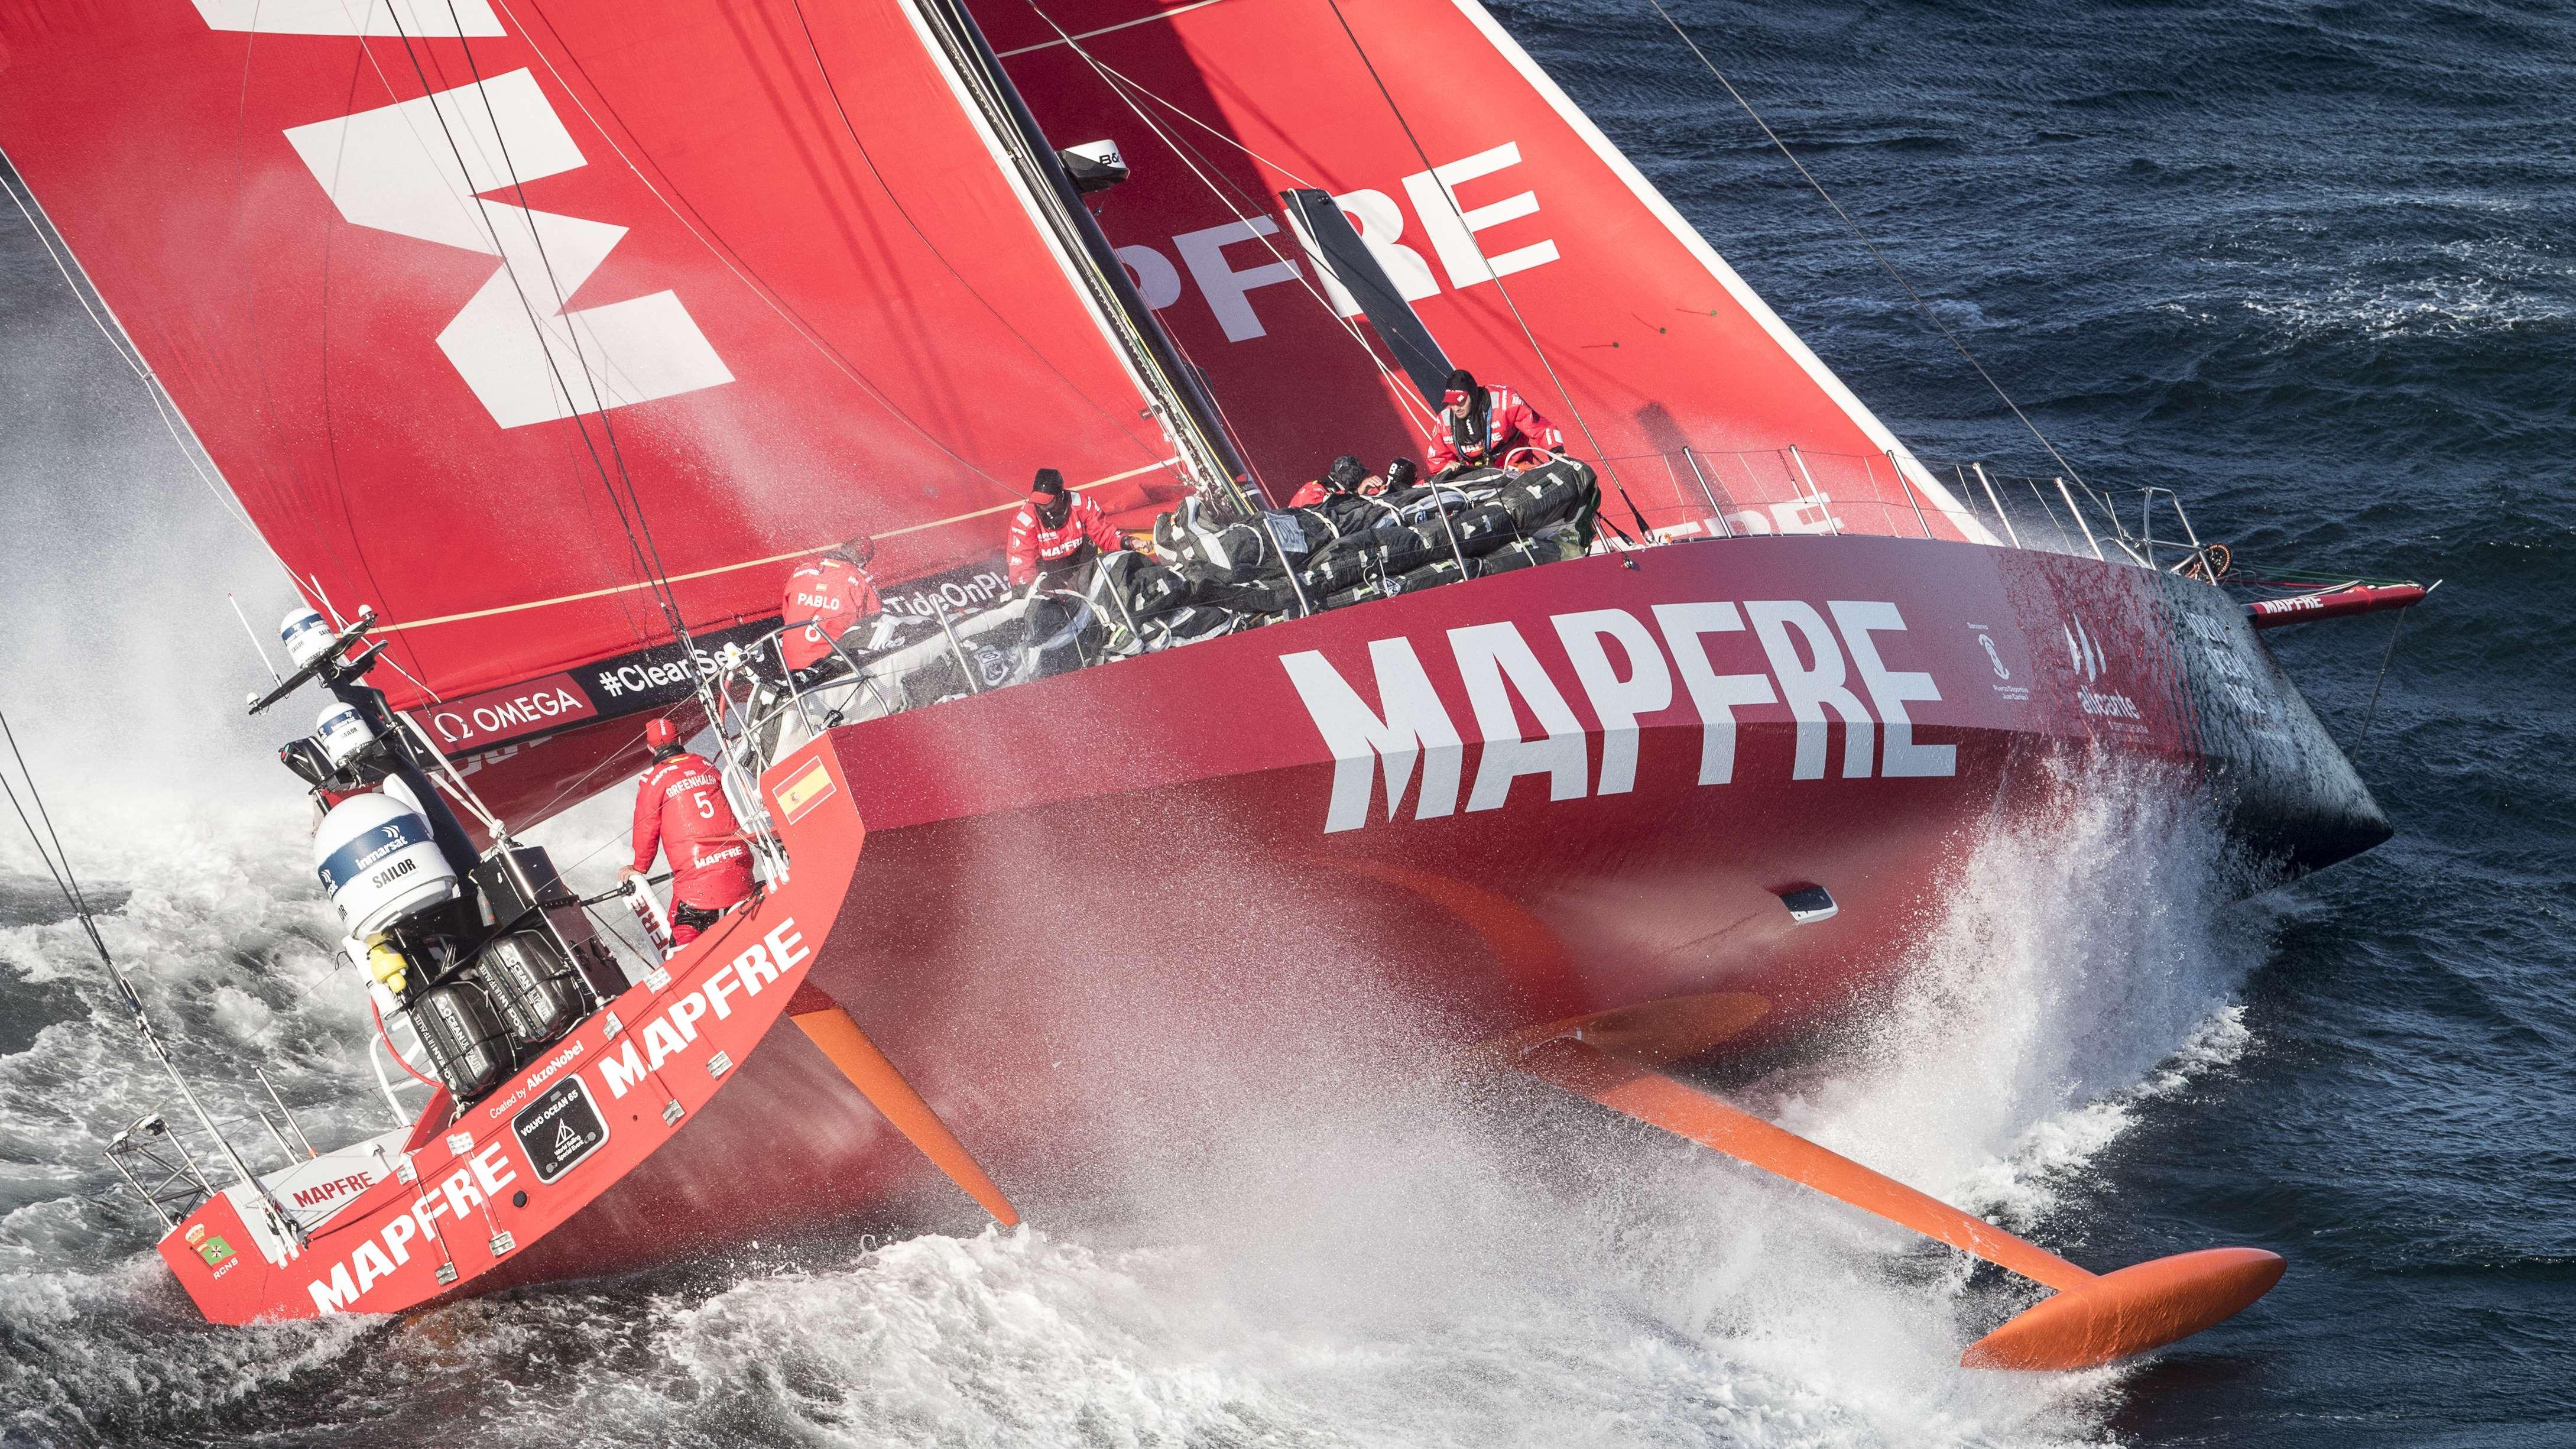 Volvo Ocean Race competitor Mapfre heeled over in heavy swell